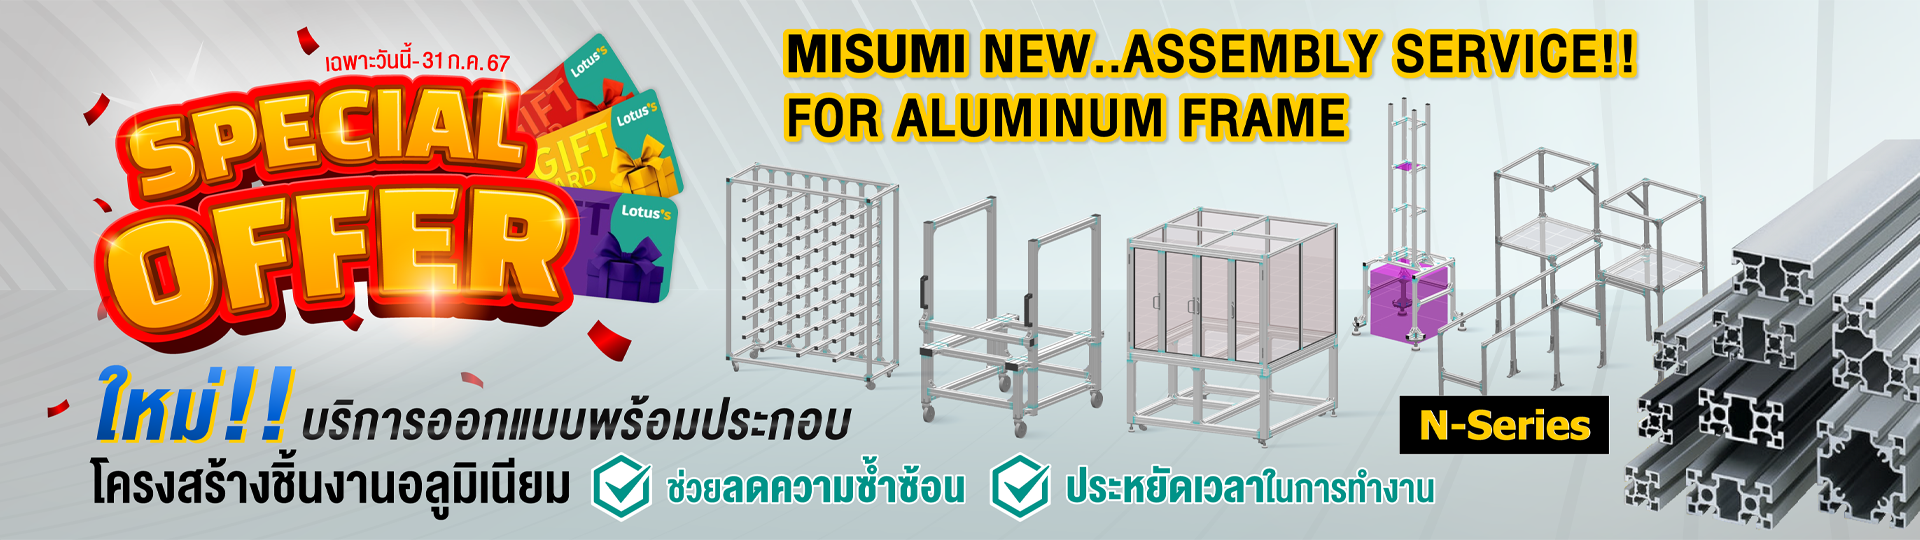 ALUMINUM FRAMES ASSEMBLY ONE STOP SERVICE